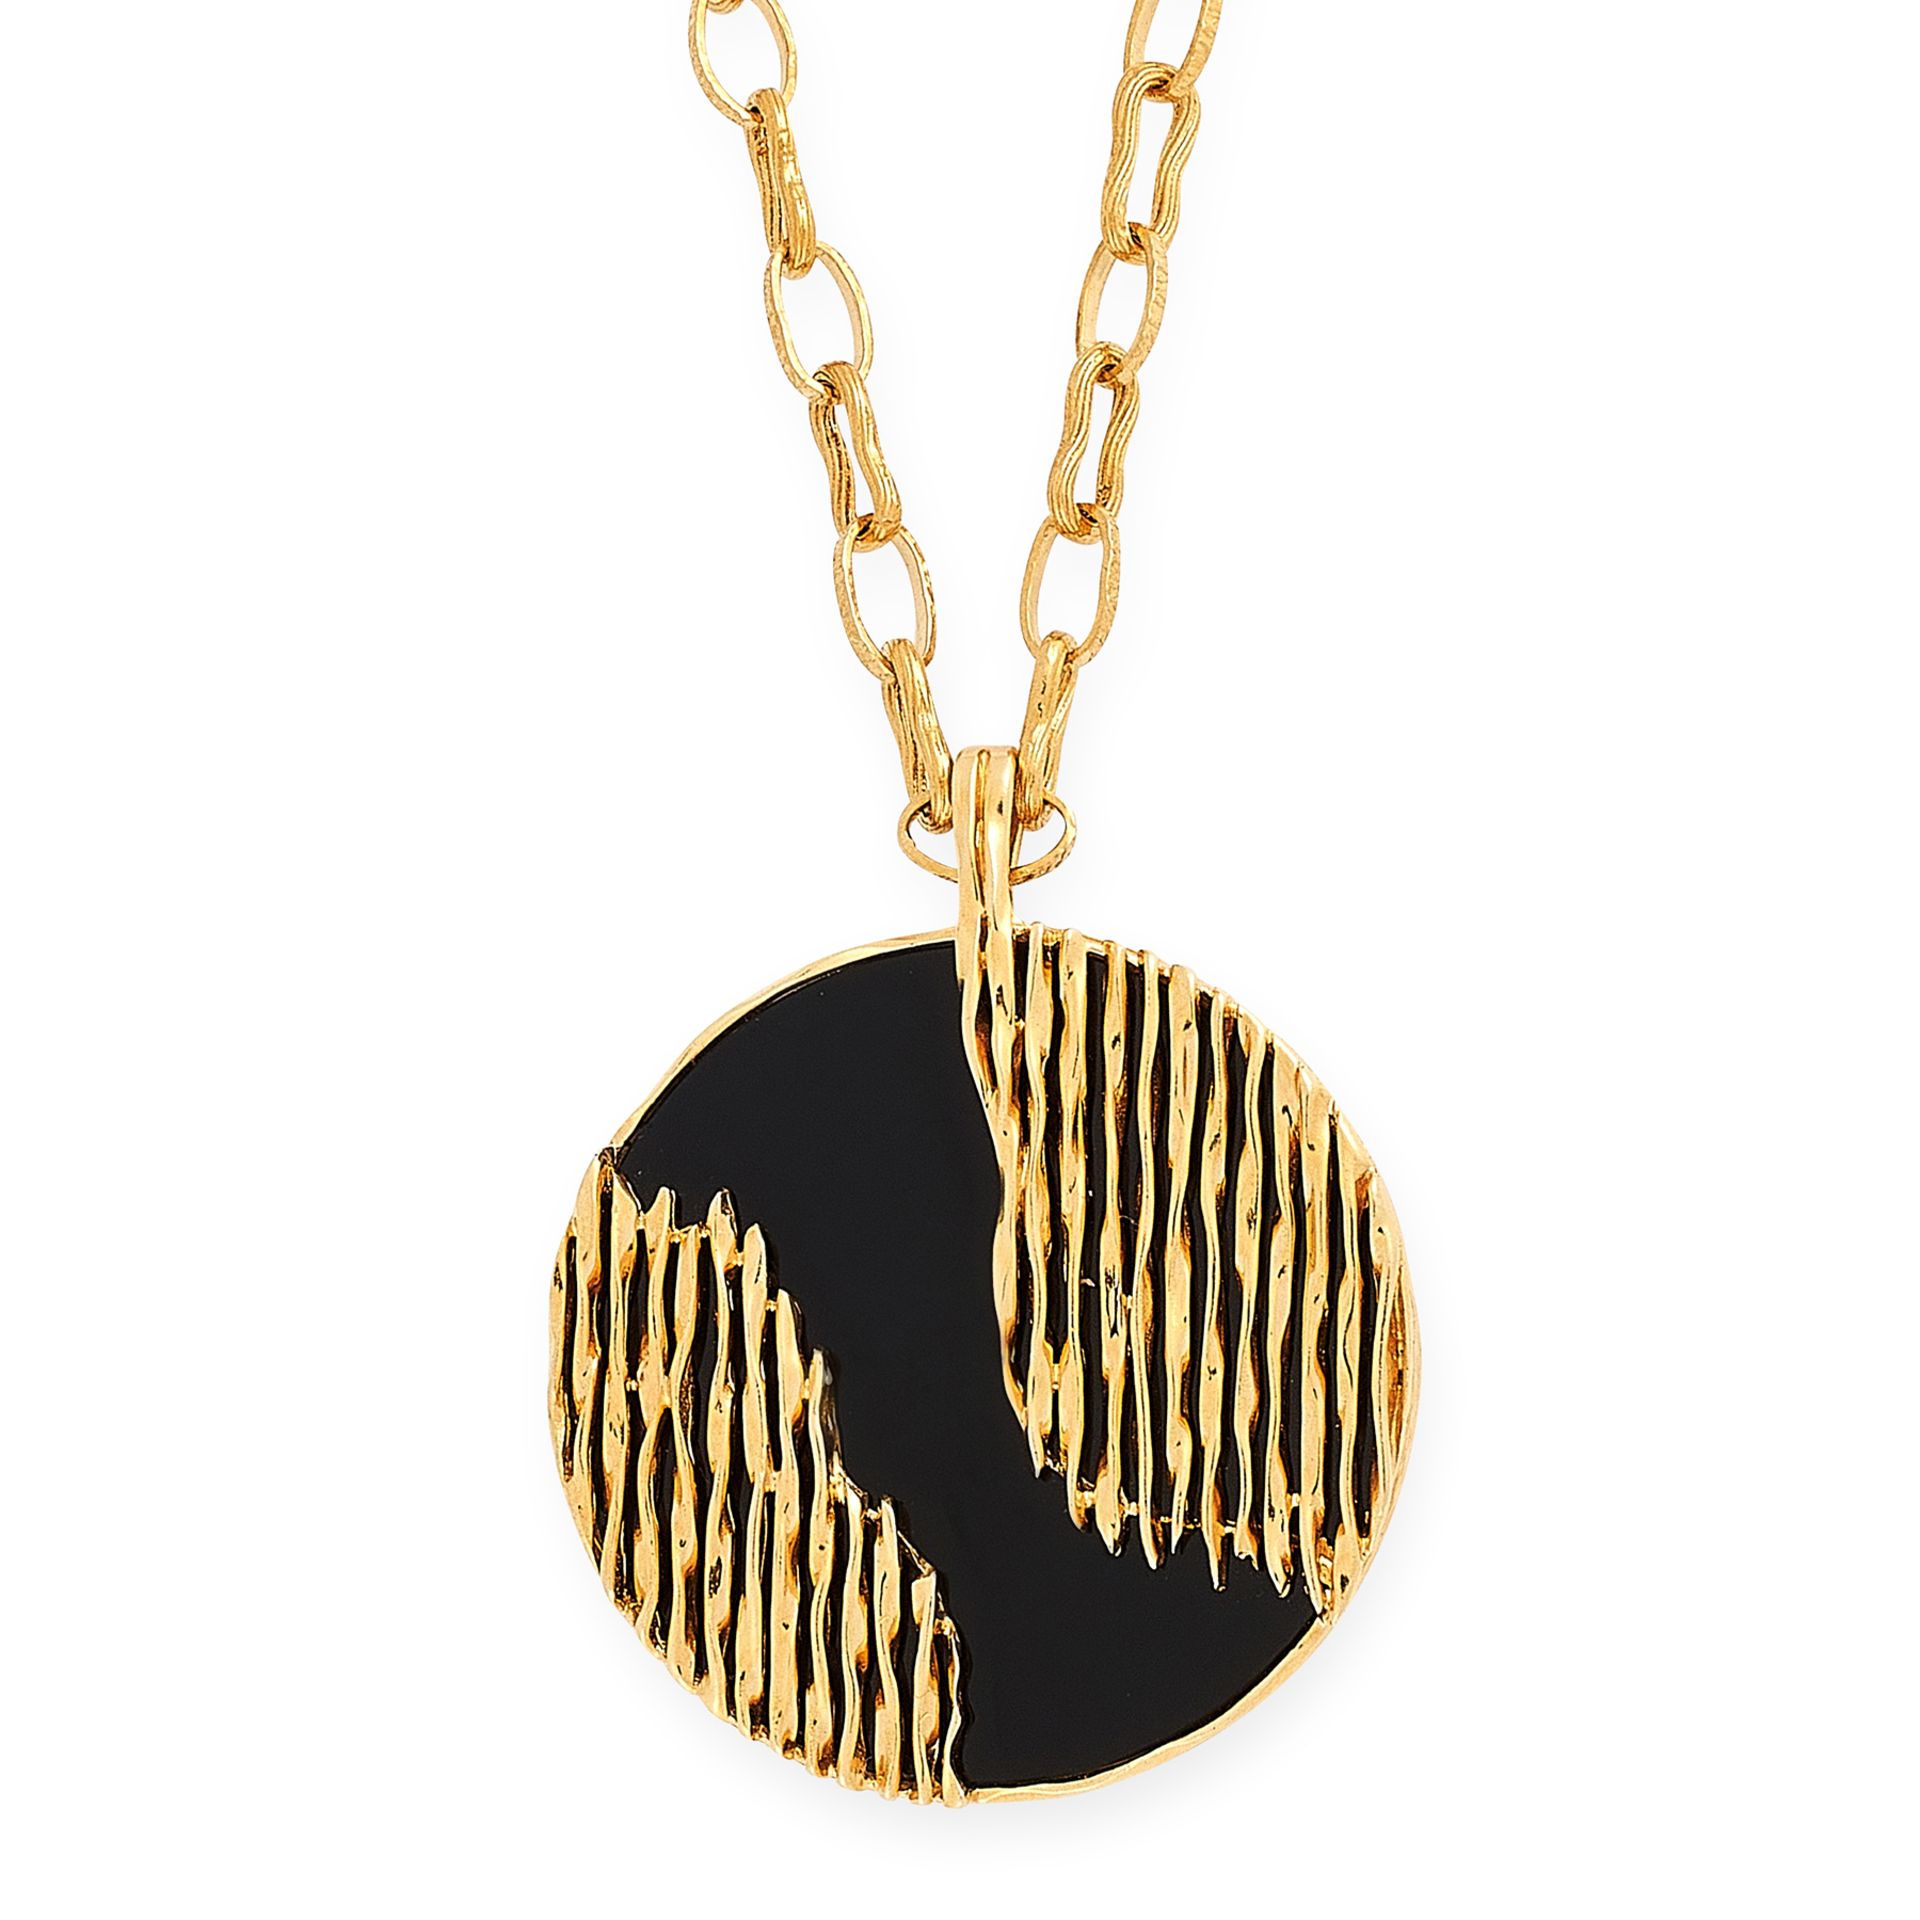 A VINTAGE ONYX PENDANT AND CHAIN, KUTCHINSKY 1972 in 18ct yellow gold, the pendant designed as a